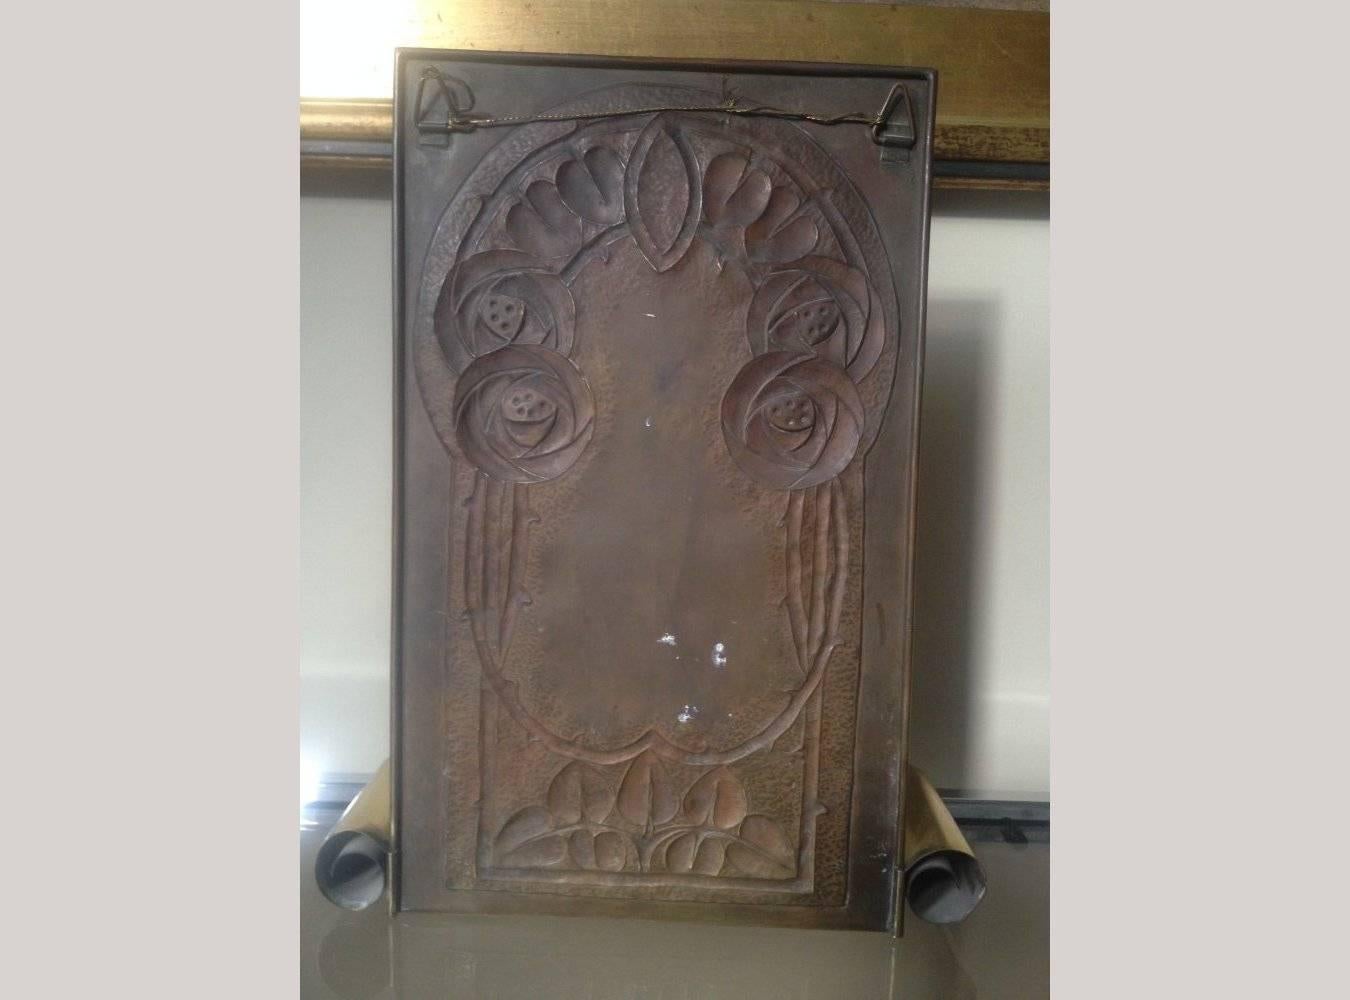 English A Glasgow School Brass Candle Sconce With Stylised Glasgow Roses & Scroll Detail